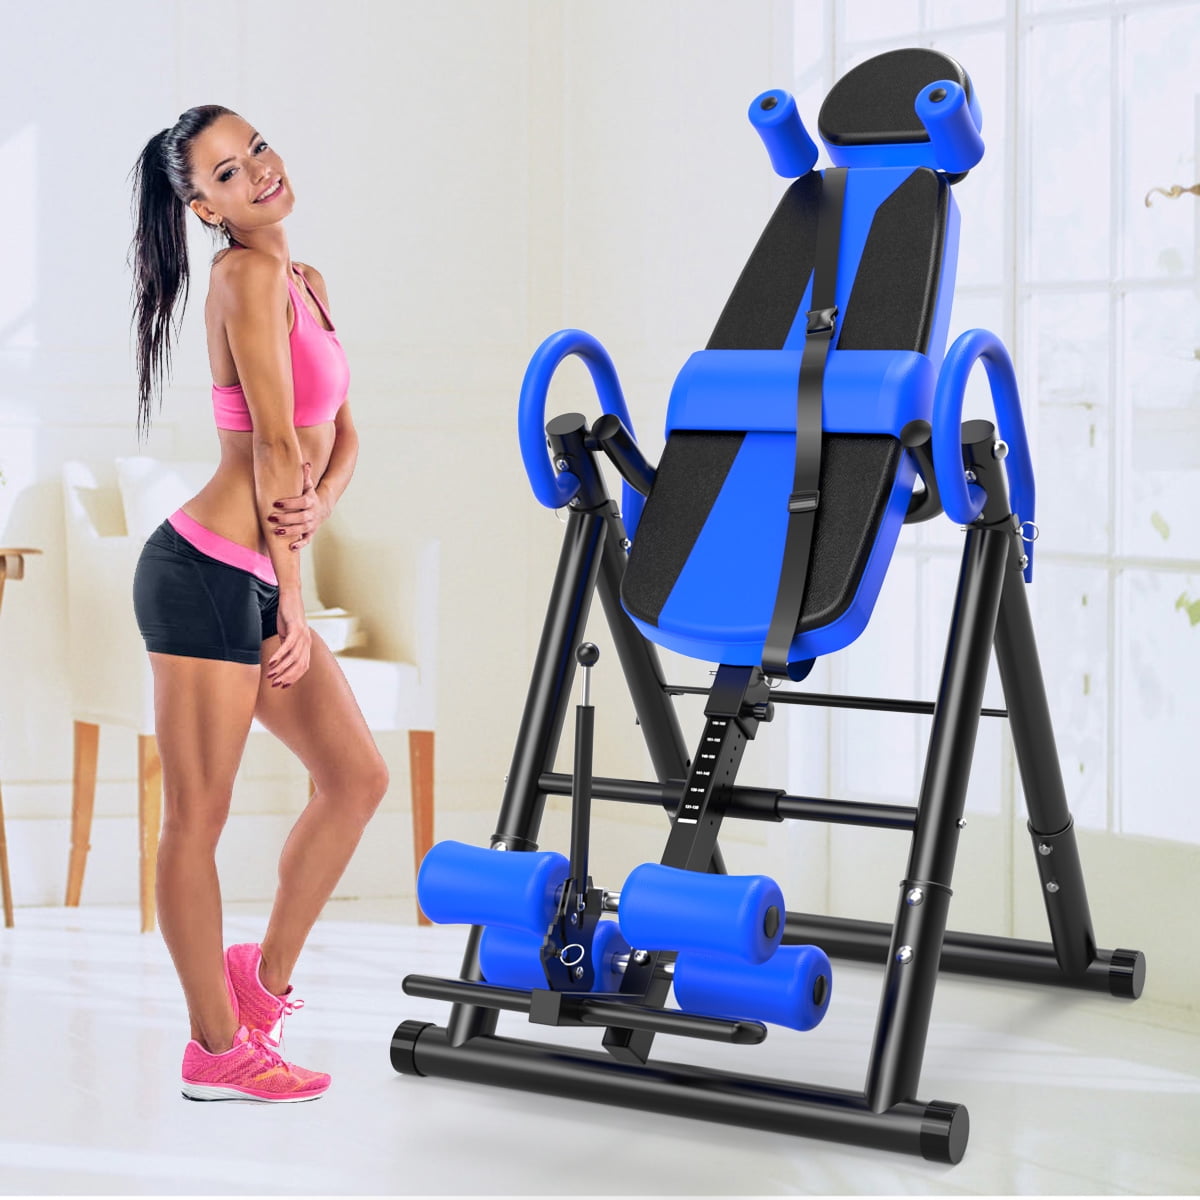 Heavy Duty Inversion Table Back Pain Relief Therapy Fitness Exercise Pad Home US 